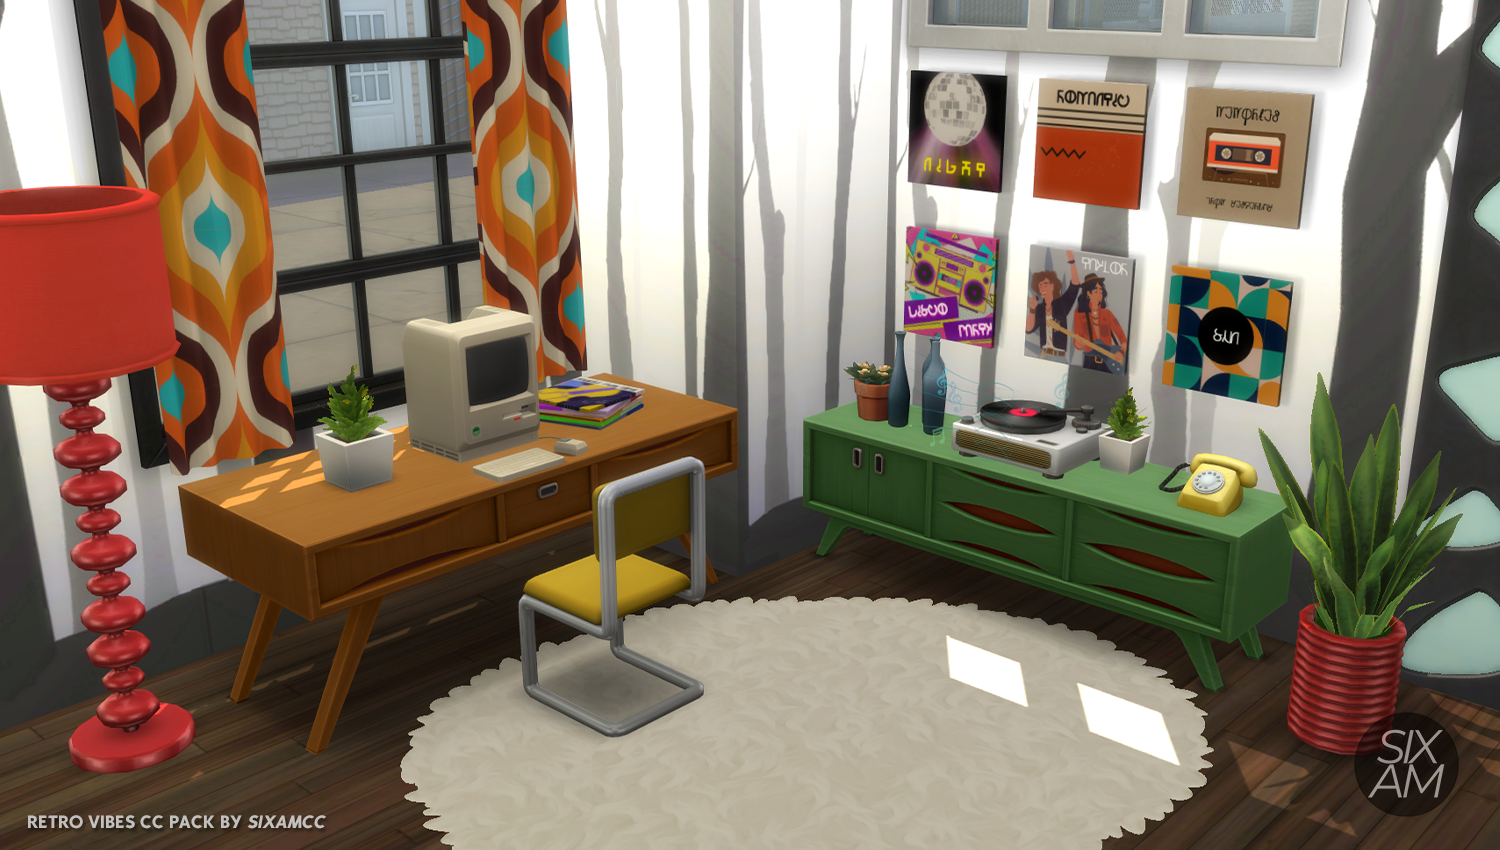 Retro Vibes Cc Pack The Sims 4 Build Buy Curseforge